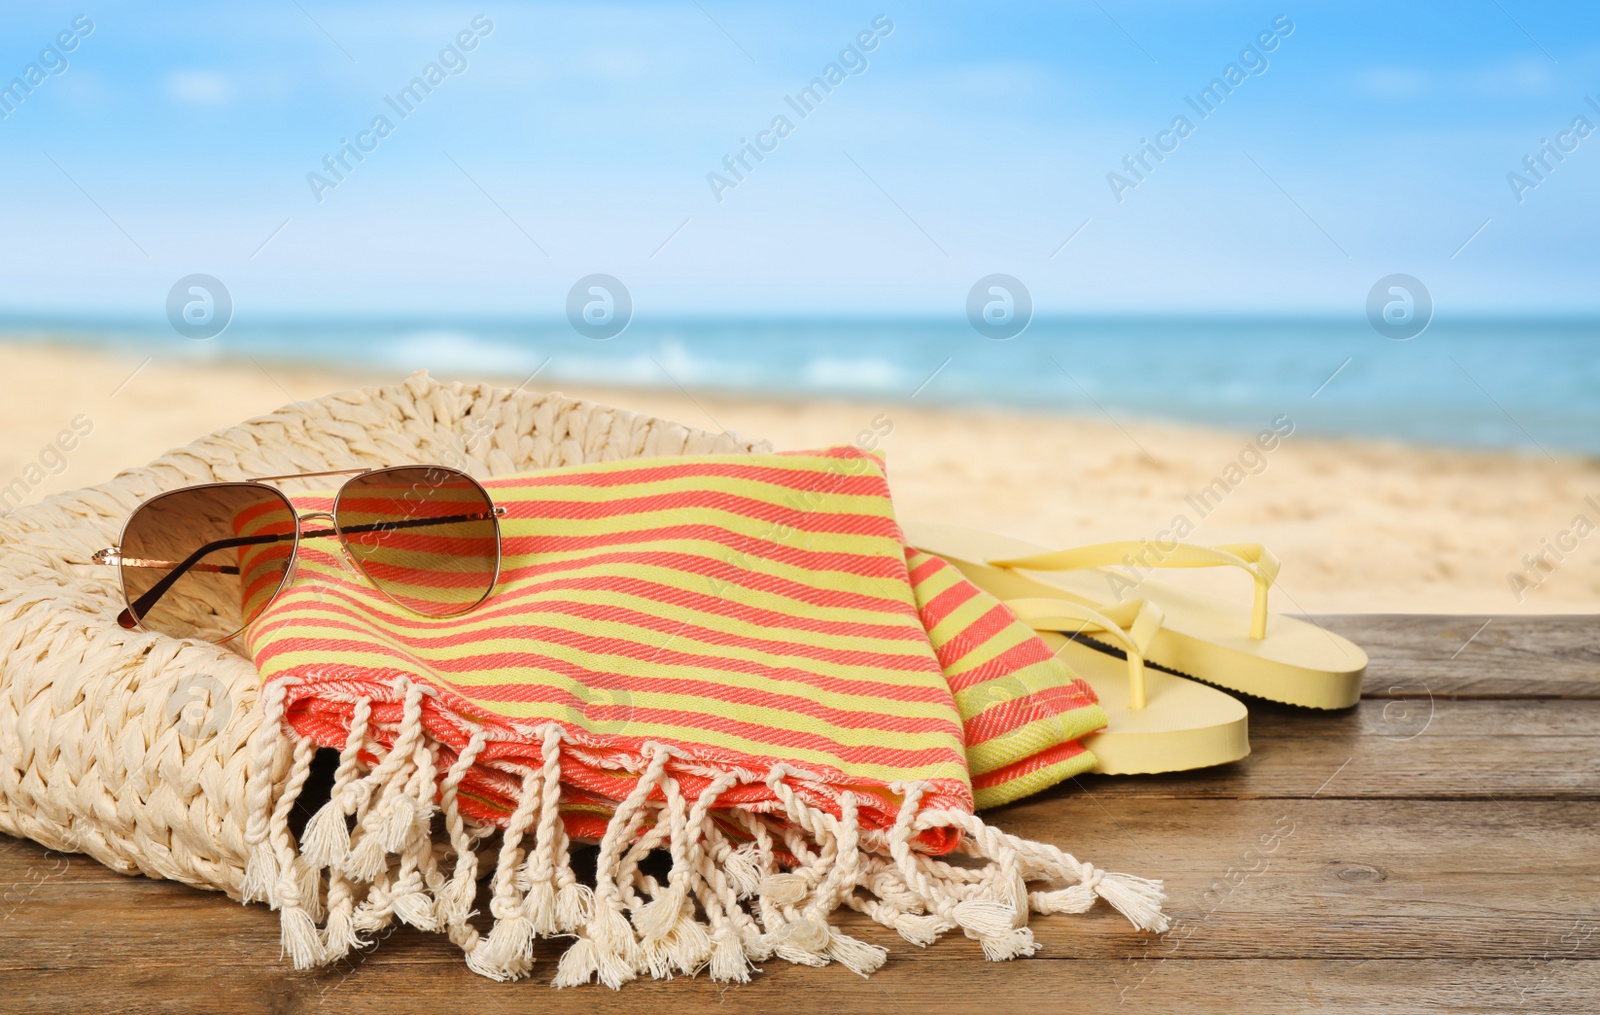 Image of Beach bag with towel, flip flops and sunglasses on wooden surface near seashore